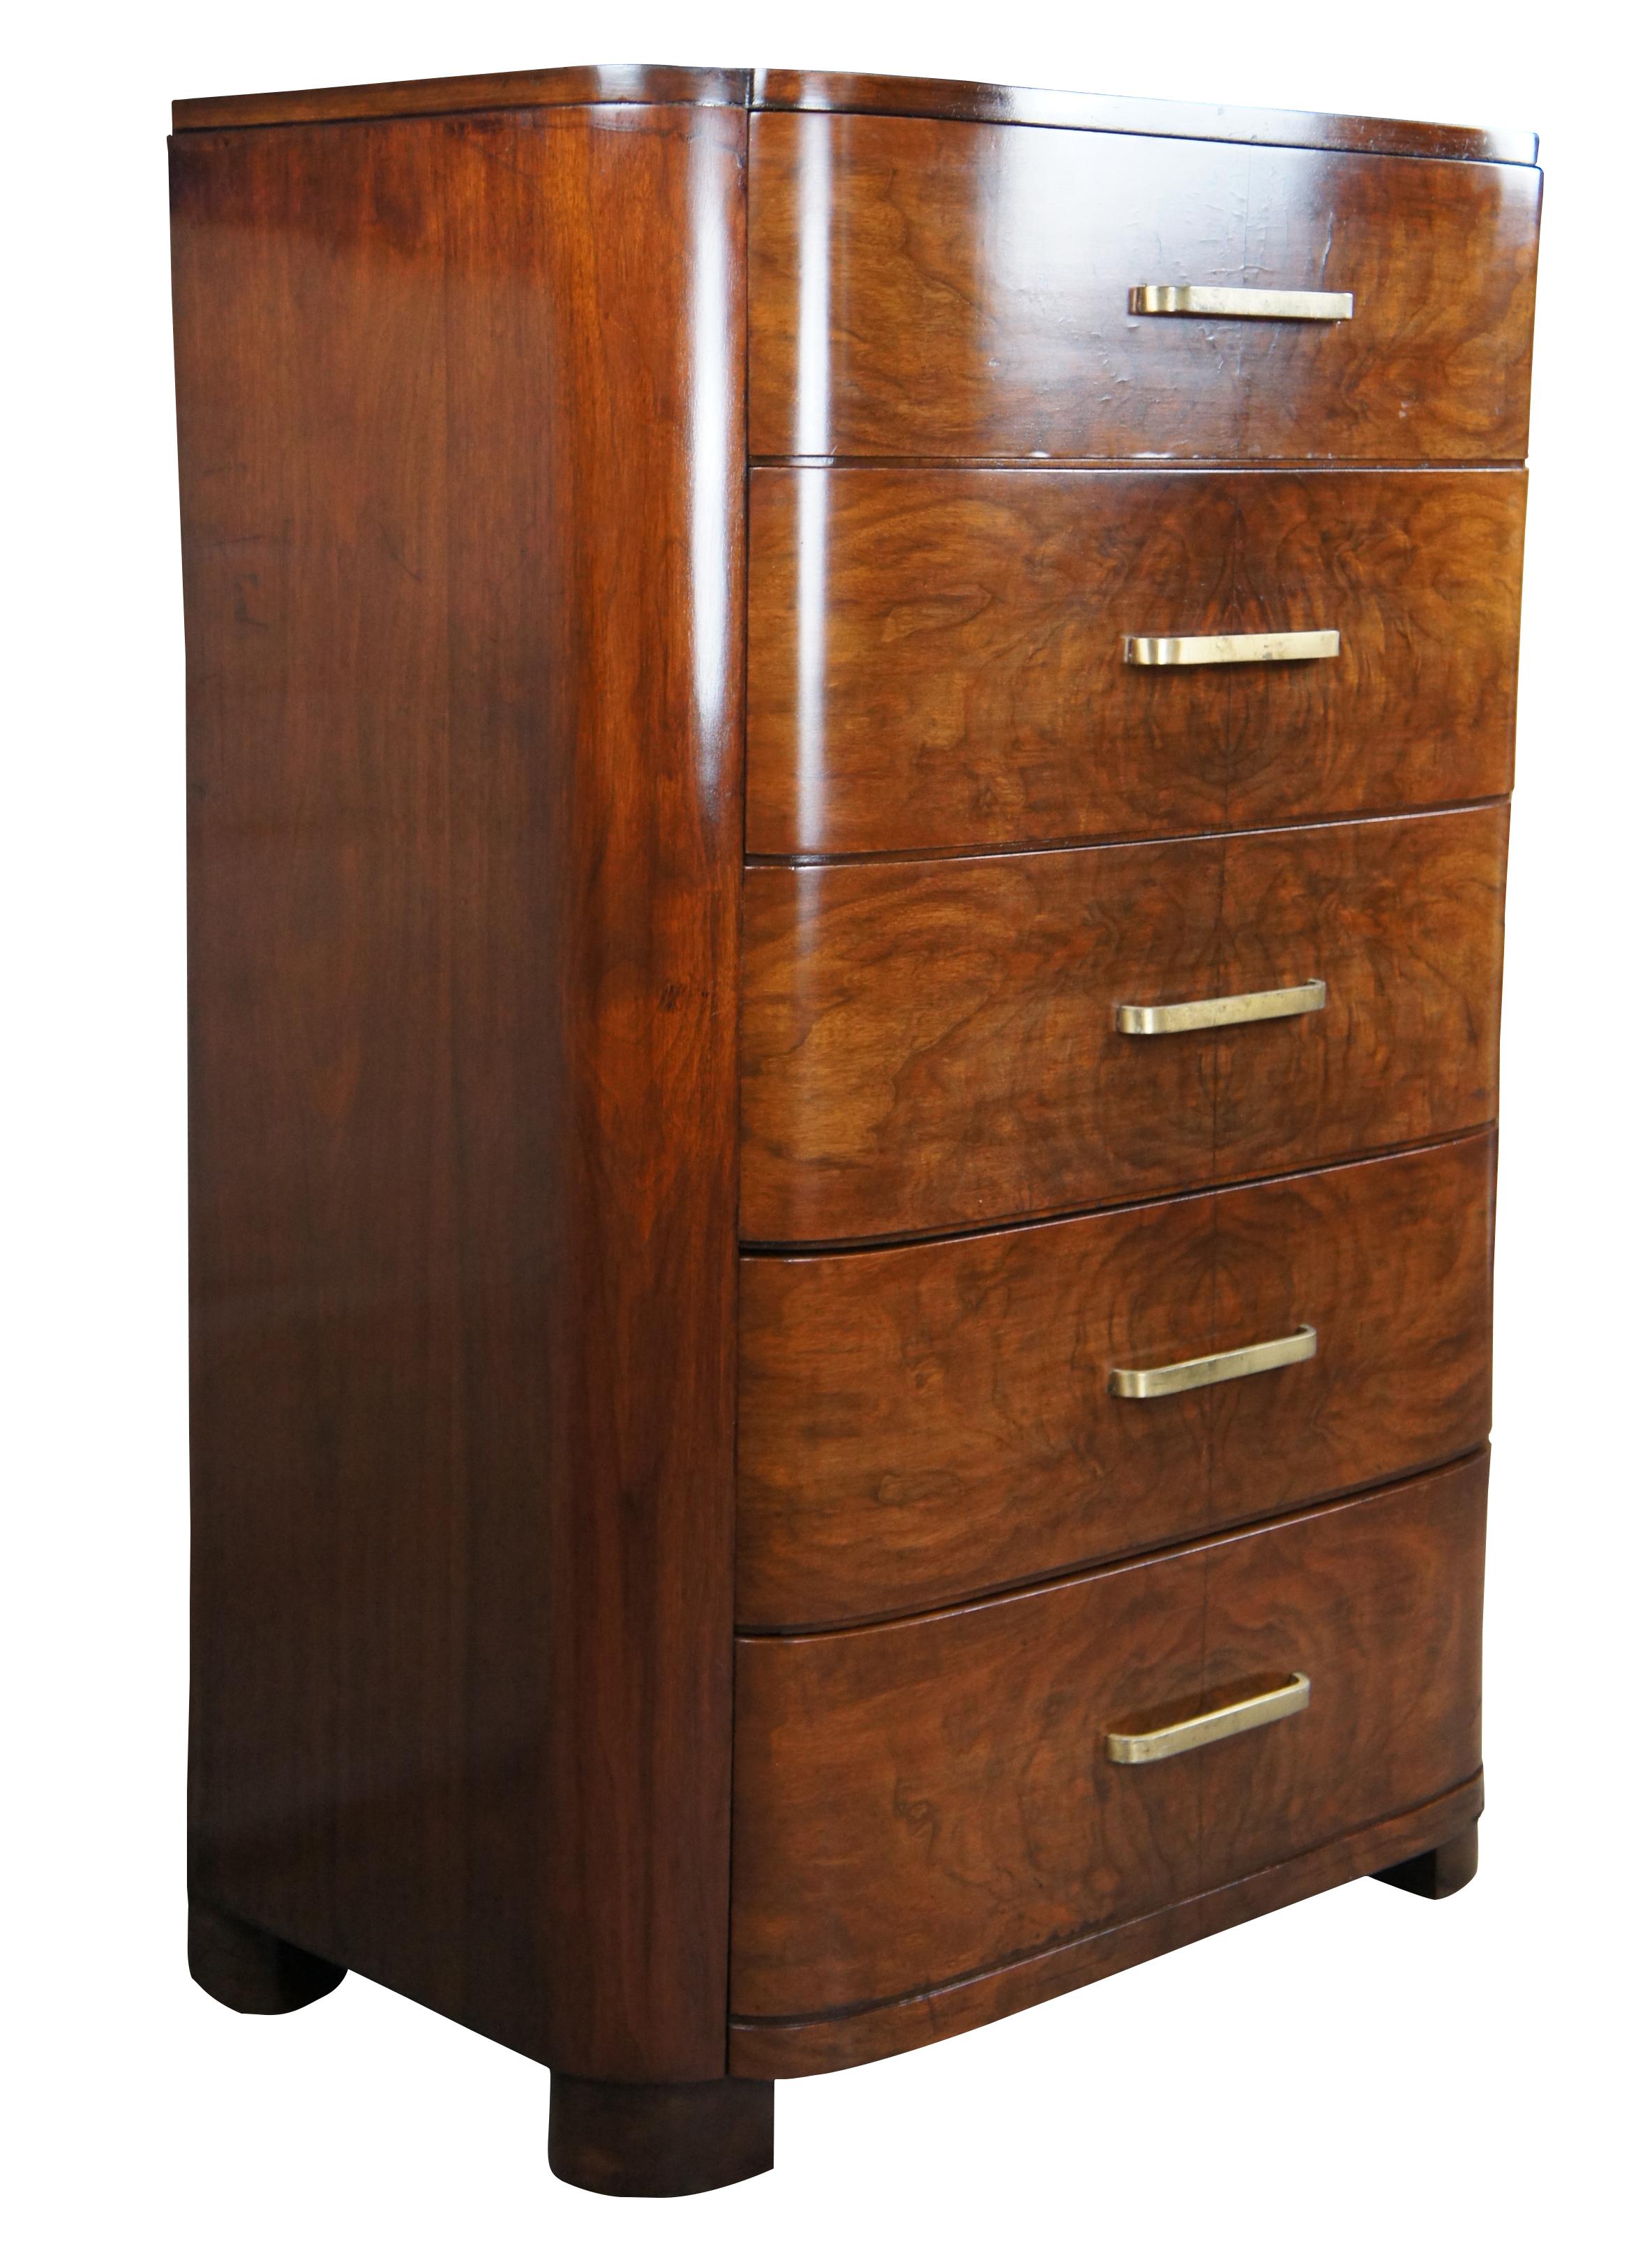 American Late Art Deco tallboy chest of drawers, Circa 1940s. Made from walnut with a contoured front, four dovetailed matchbook walnut drawers and brass hardware. Size:48